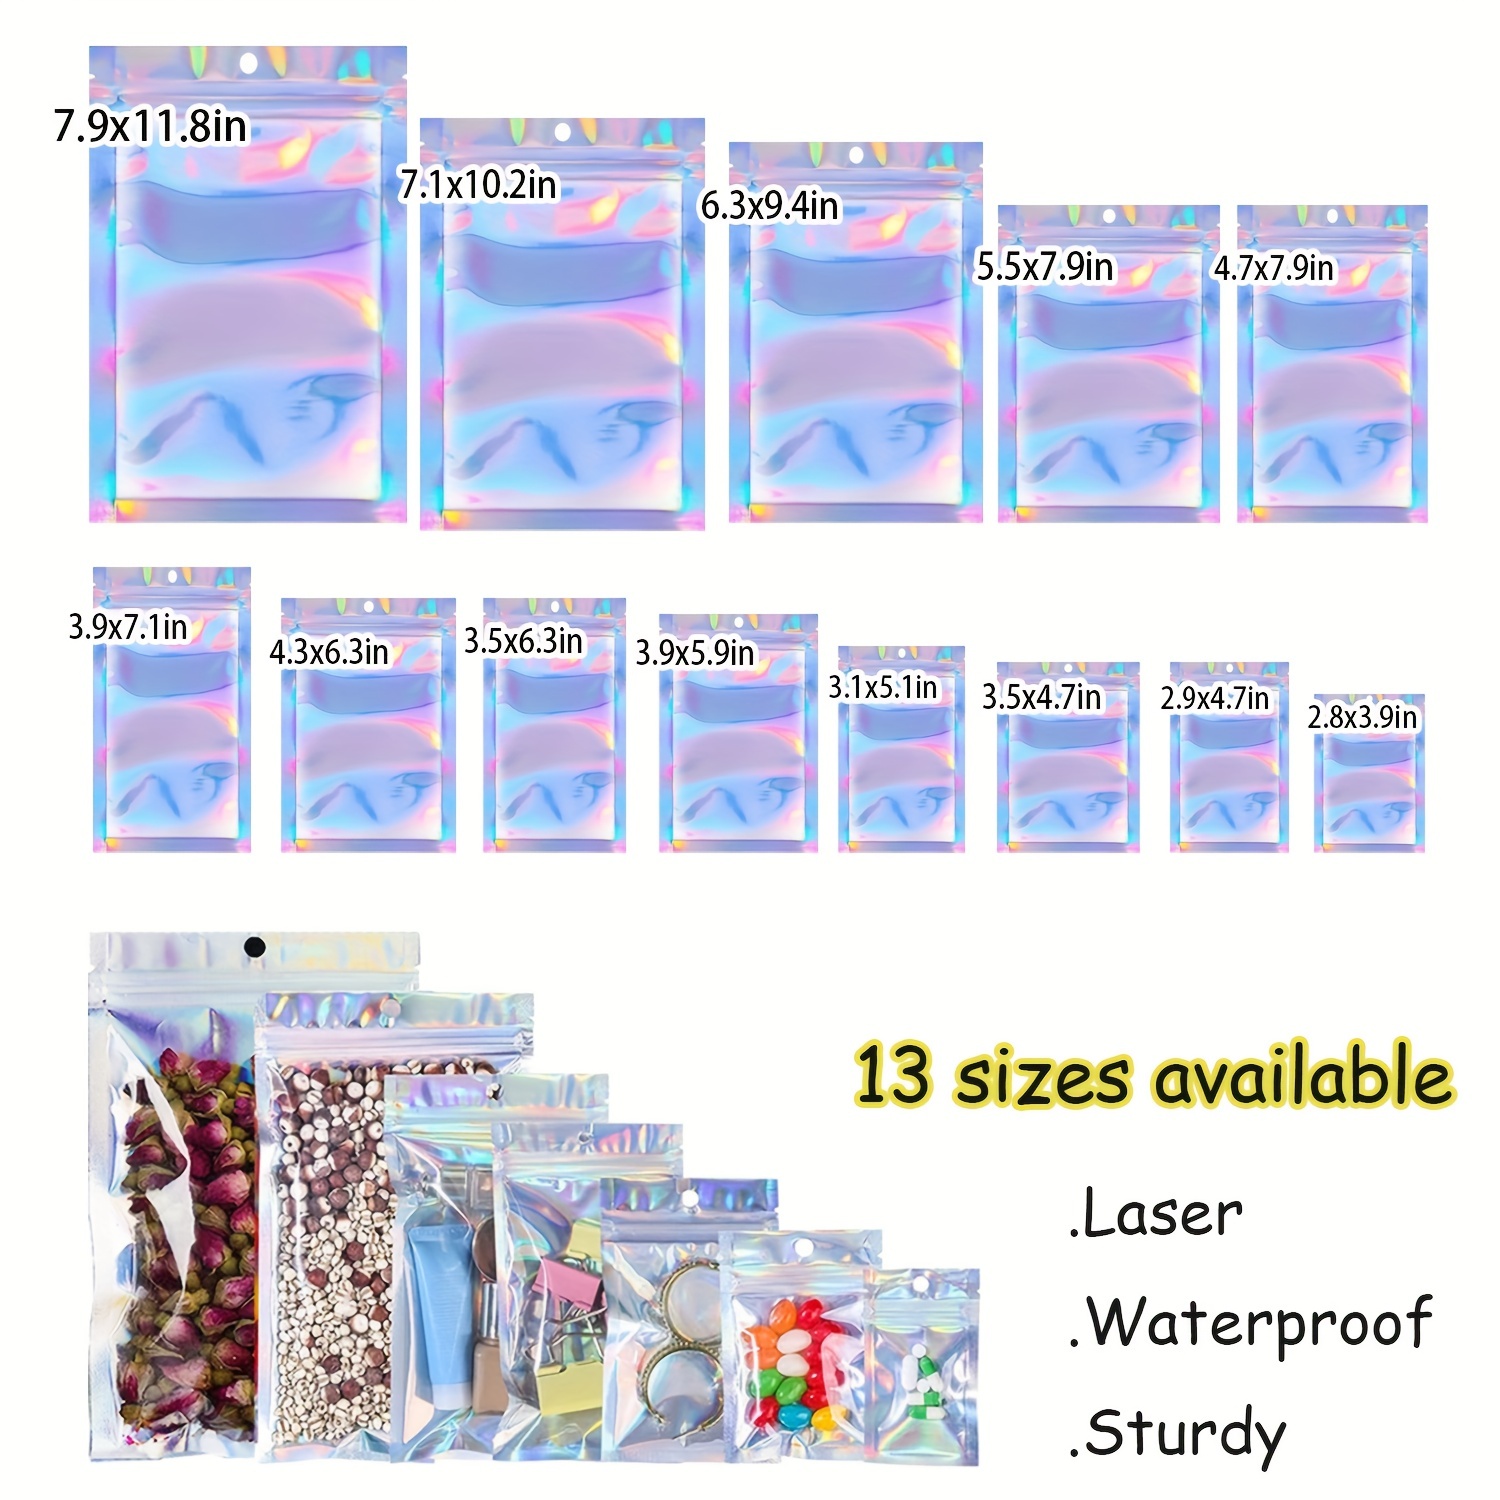 

50pcs/100pcs Resealable Metallic Foil Laser Packaging Bags In 13 Different Sizes - Mylar Bags With Clear Front Ziplock, Durable Food Storage Pouches For Jewelry, Beads, Candy Snacks